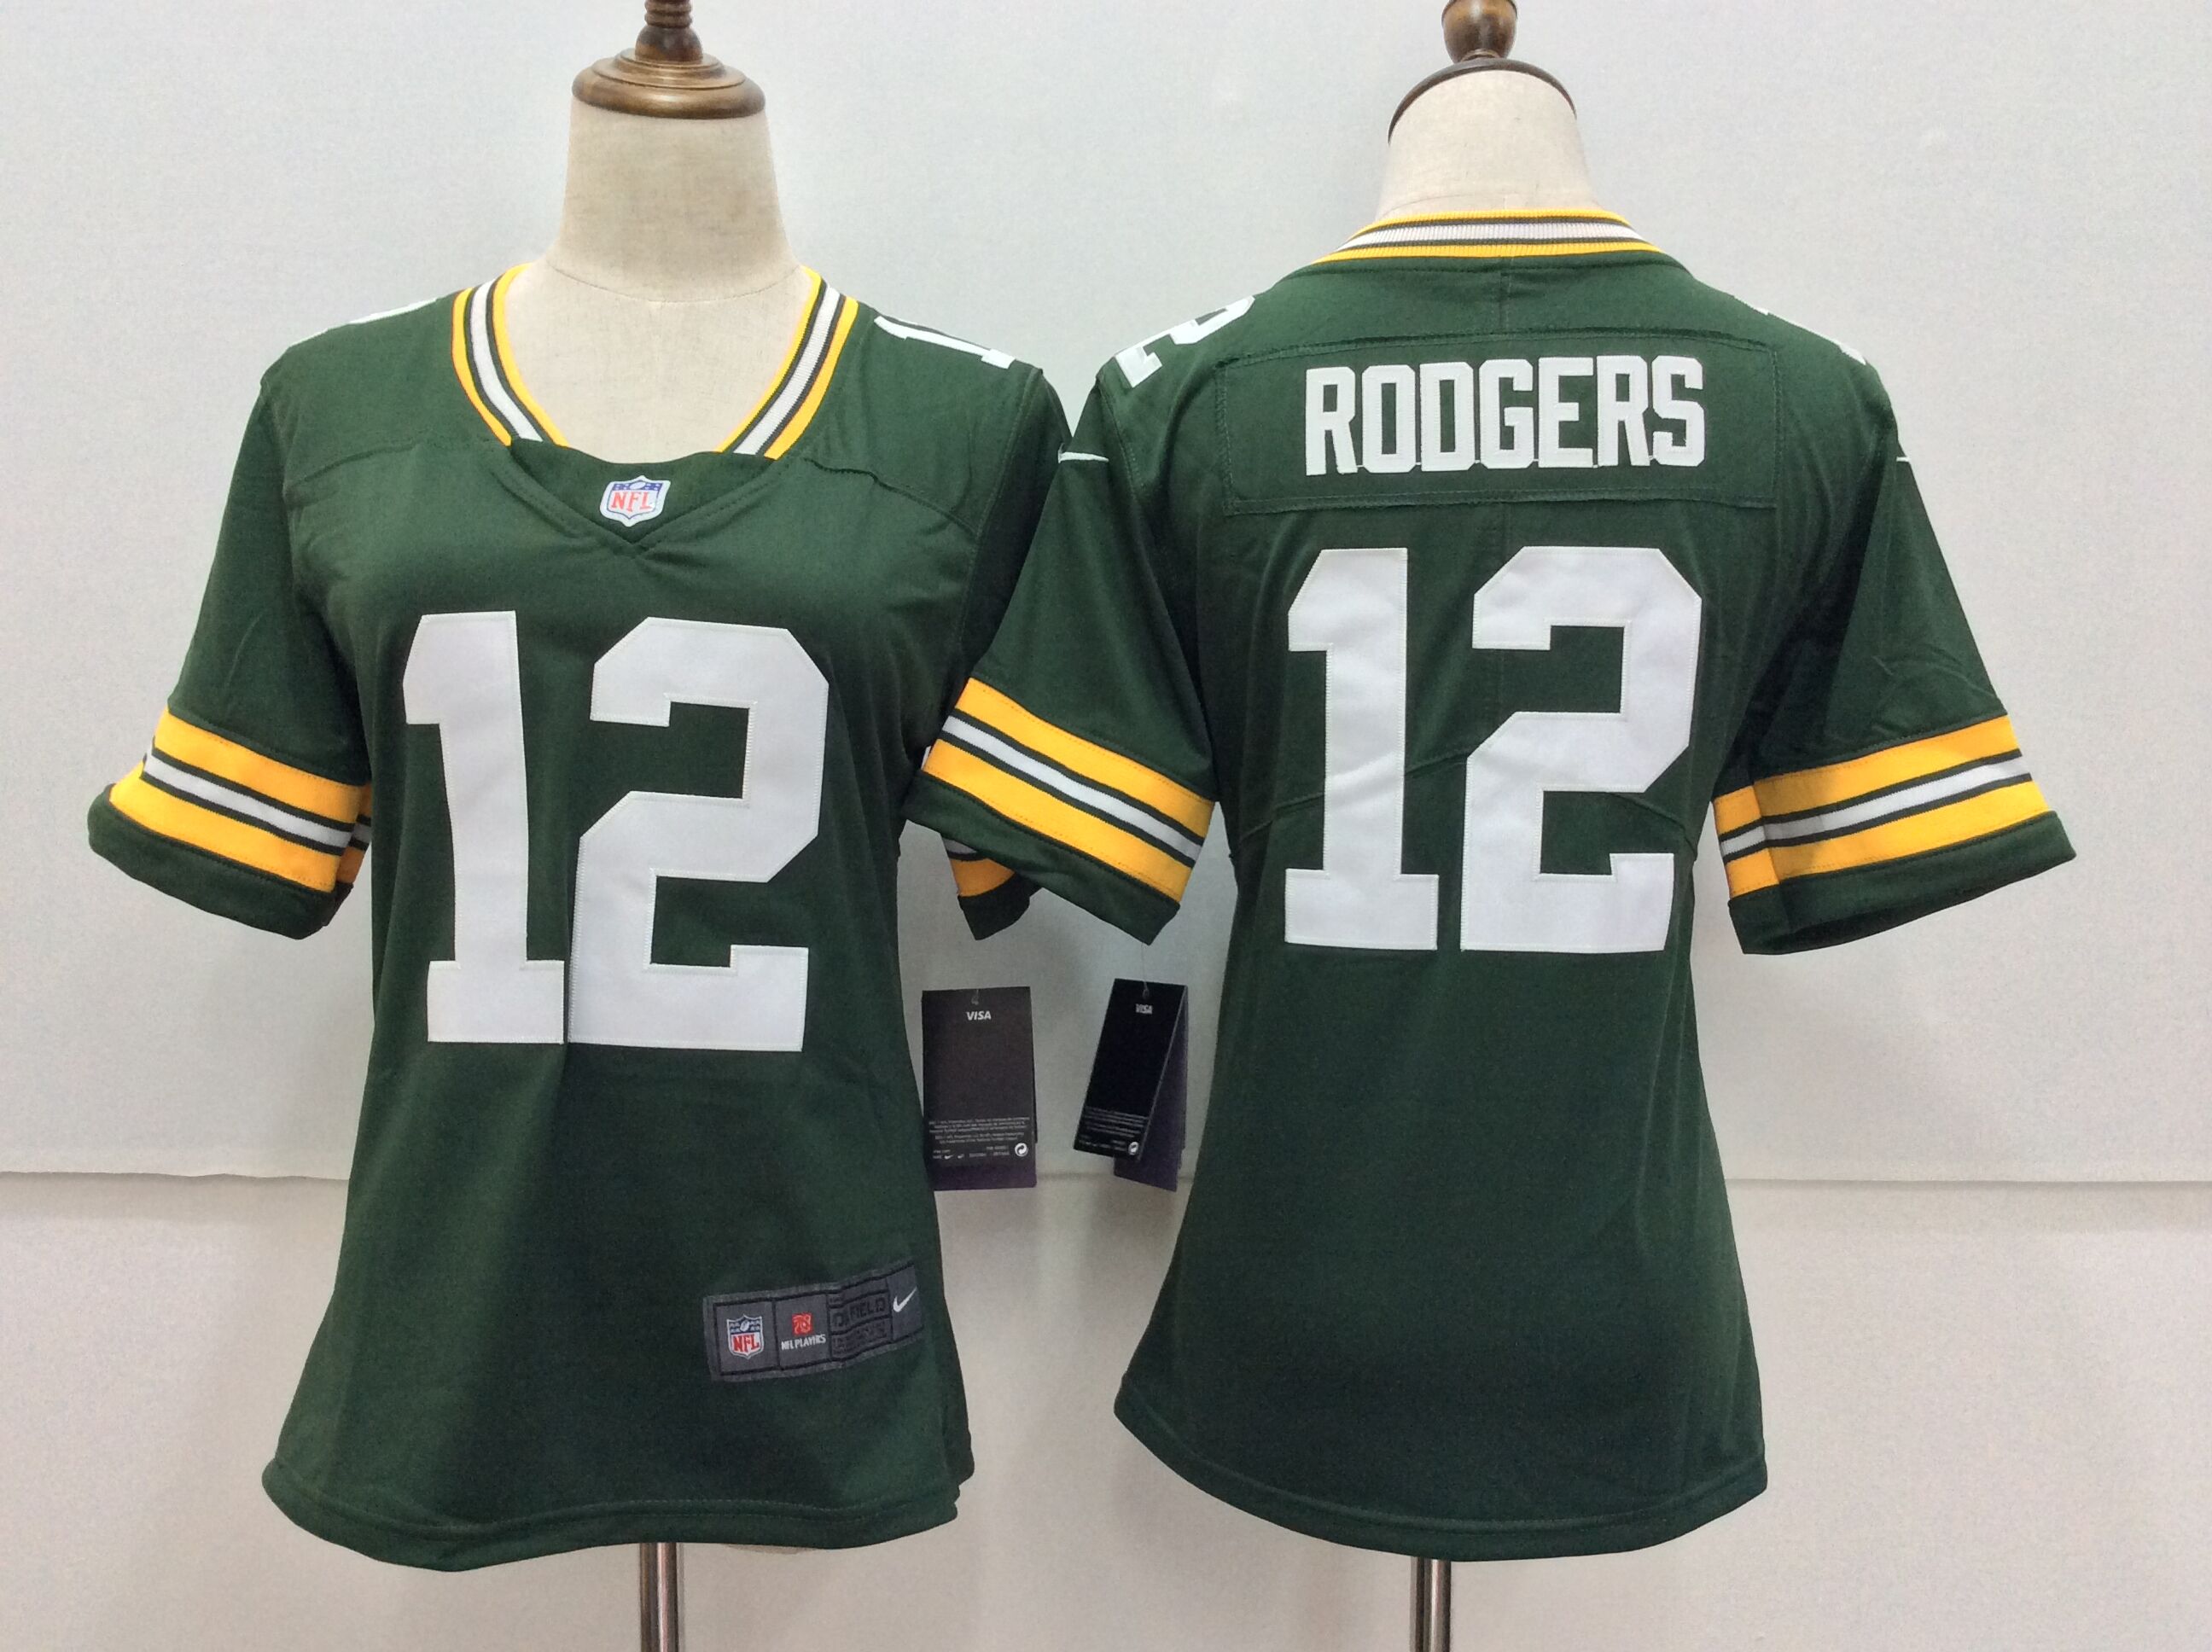 Women's Nike Green Bay Packers #12 Rodgers Green Limited Stitched Jersey(Run Small)